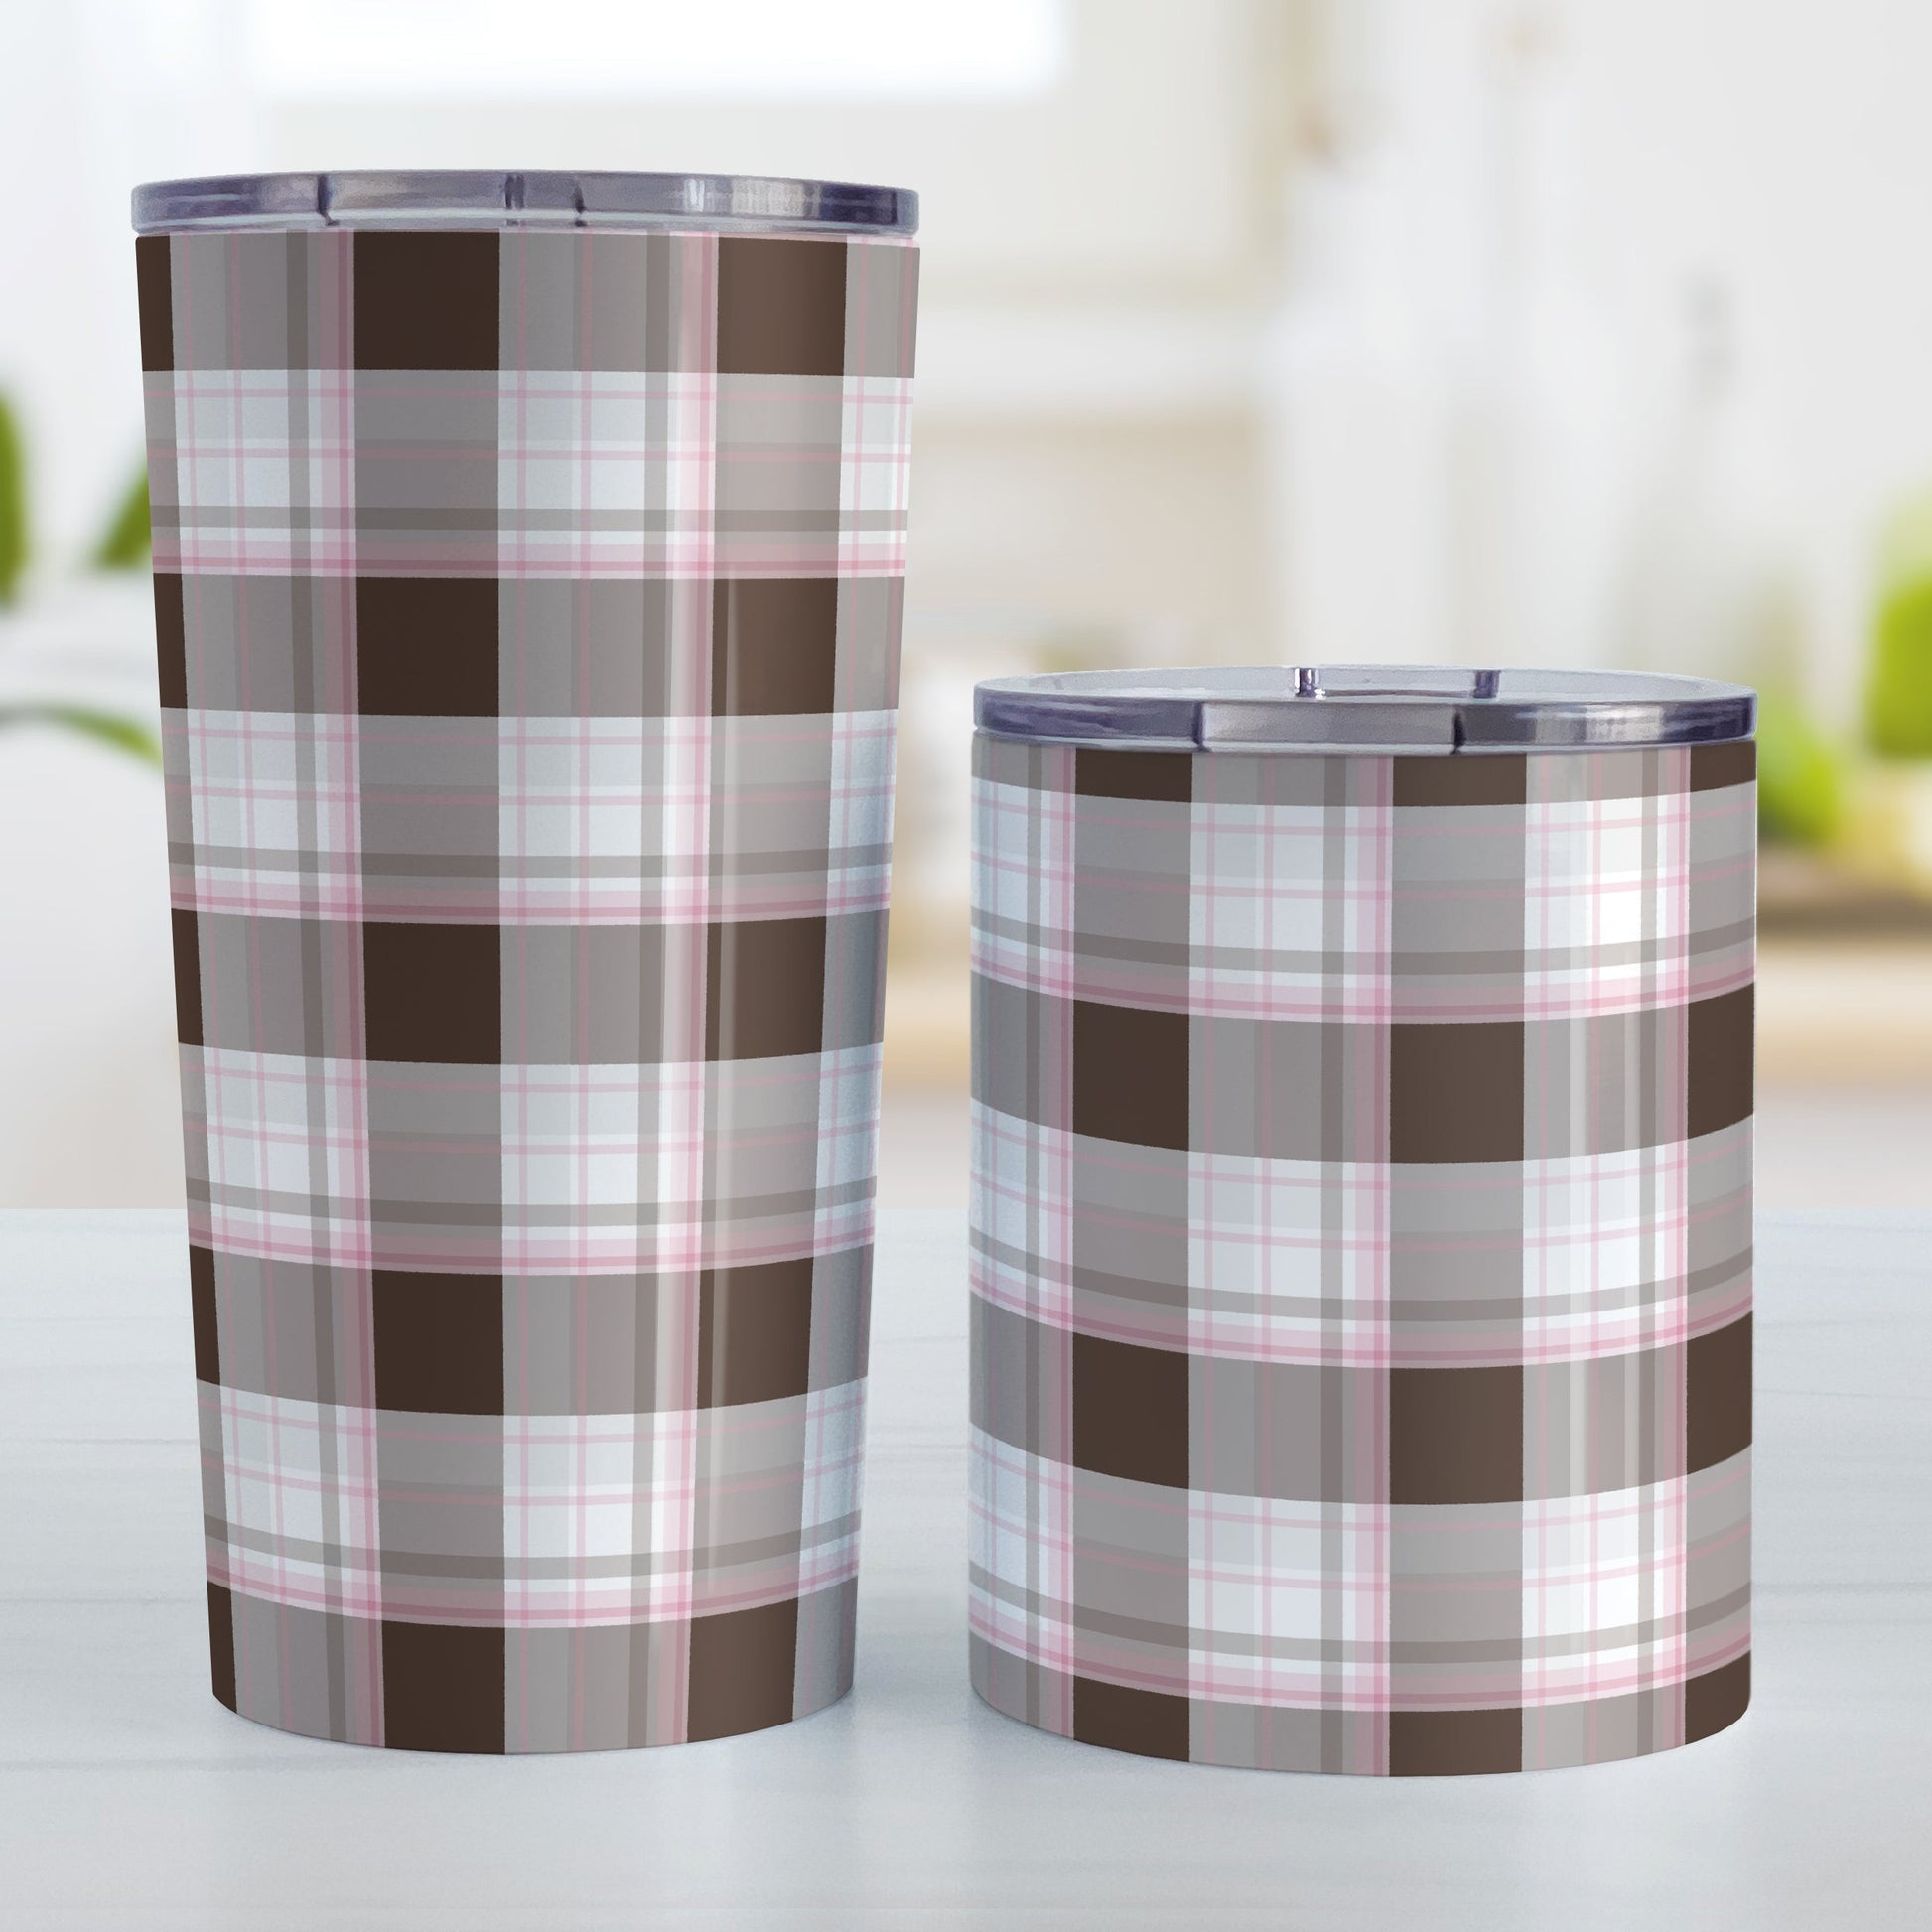 Brown Pink Plaid Tumbler Cup (20oz and 10oz) at Amy's Coffee Mugs. Stainless steel insulated tumbler cups designed with a brown plaid pattern with pink accents that wraps around the cups. Photo shows both sized cups next to each other.